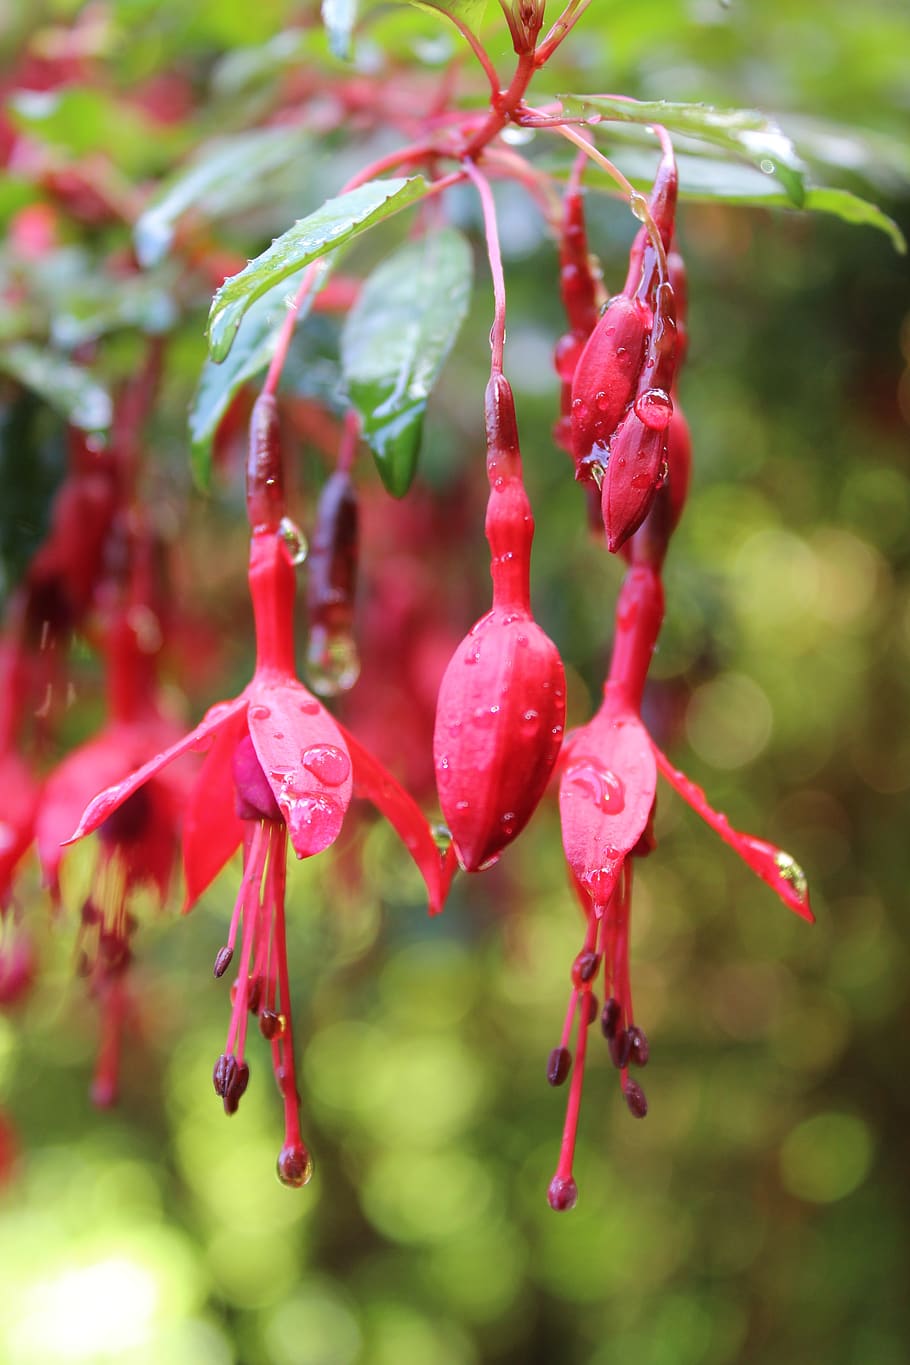 fuschia, flower, rain, droplet, red, growth, plant, freshness, focus on foreground, close-up